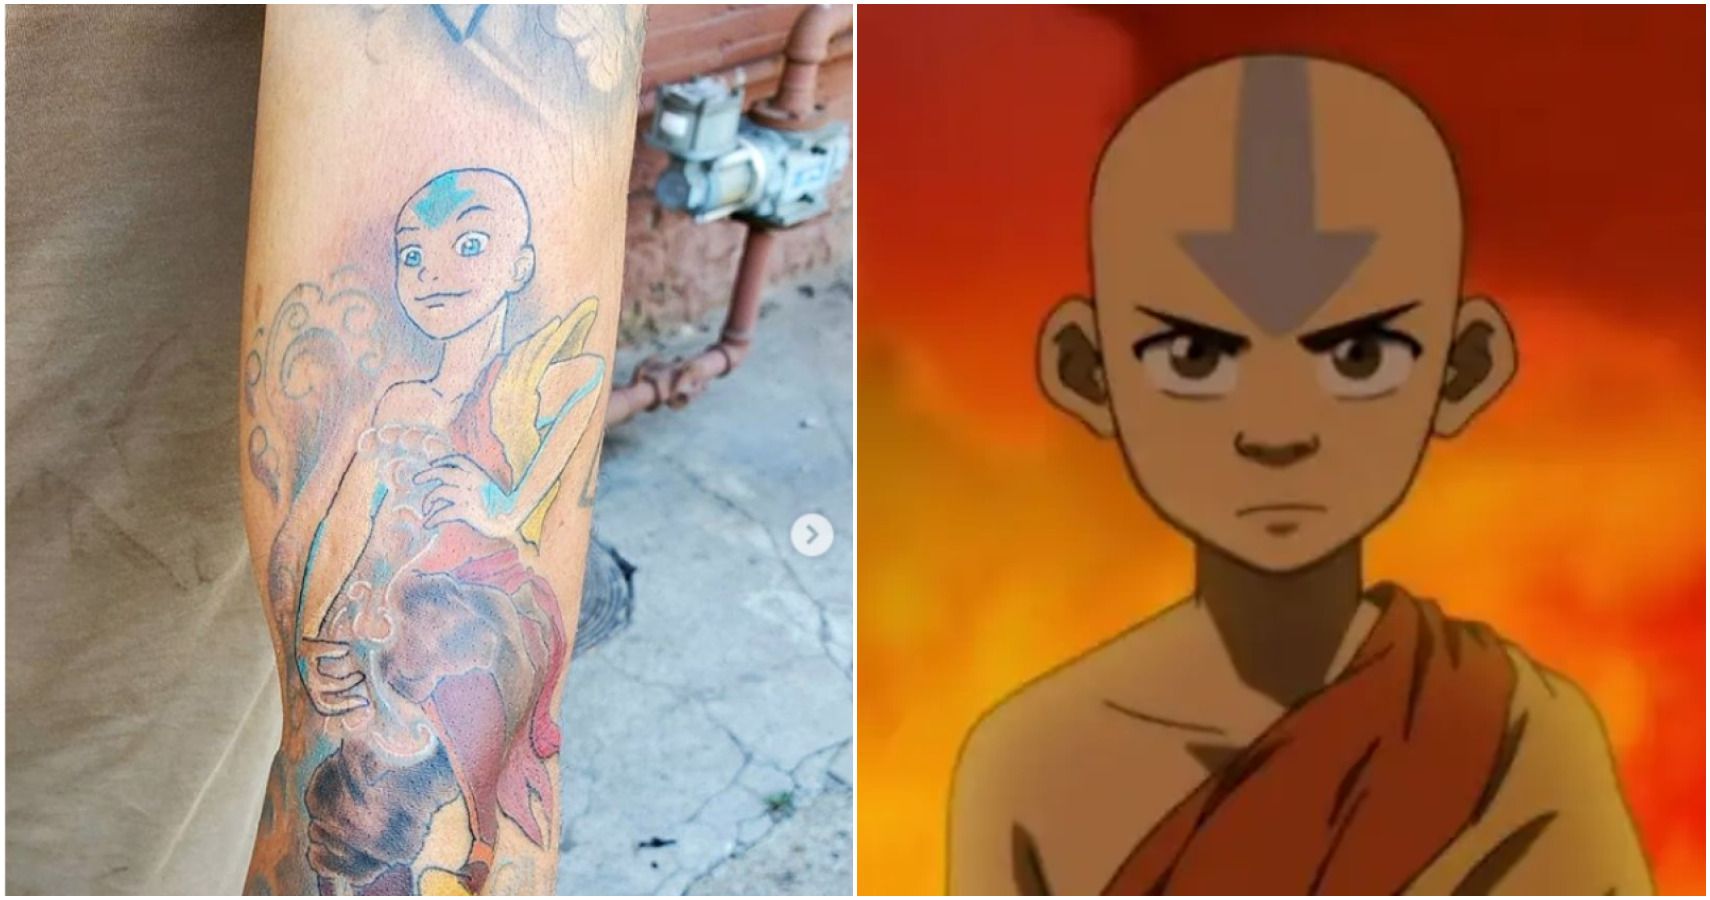 More detail than I though : r/TheLastAirbender